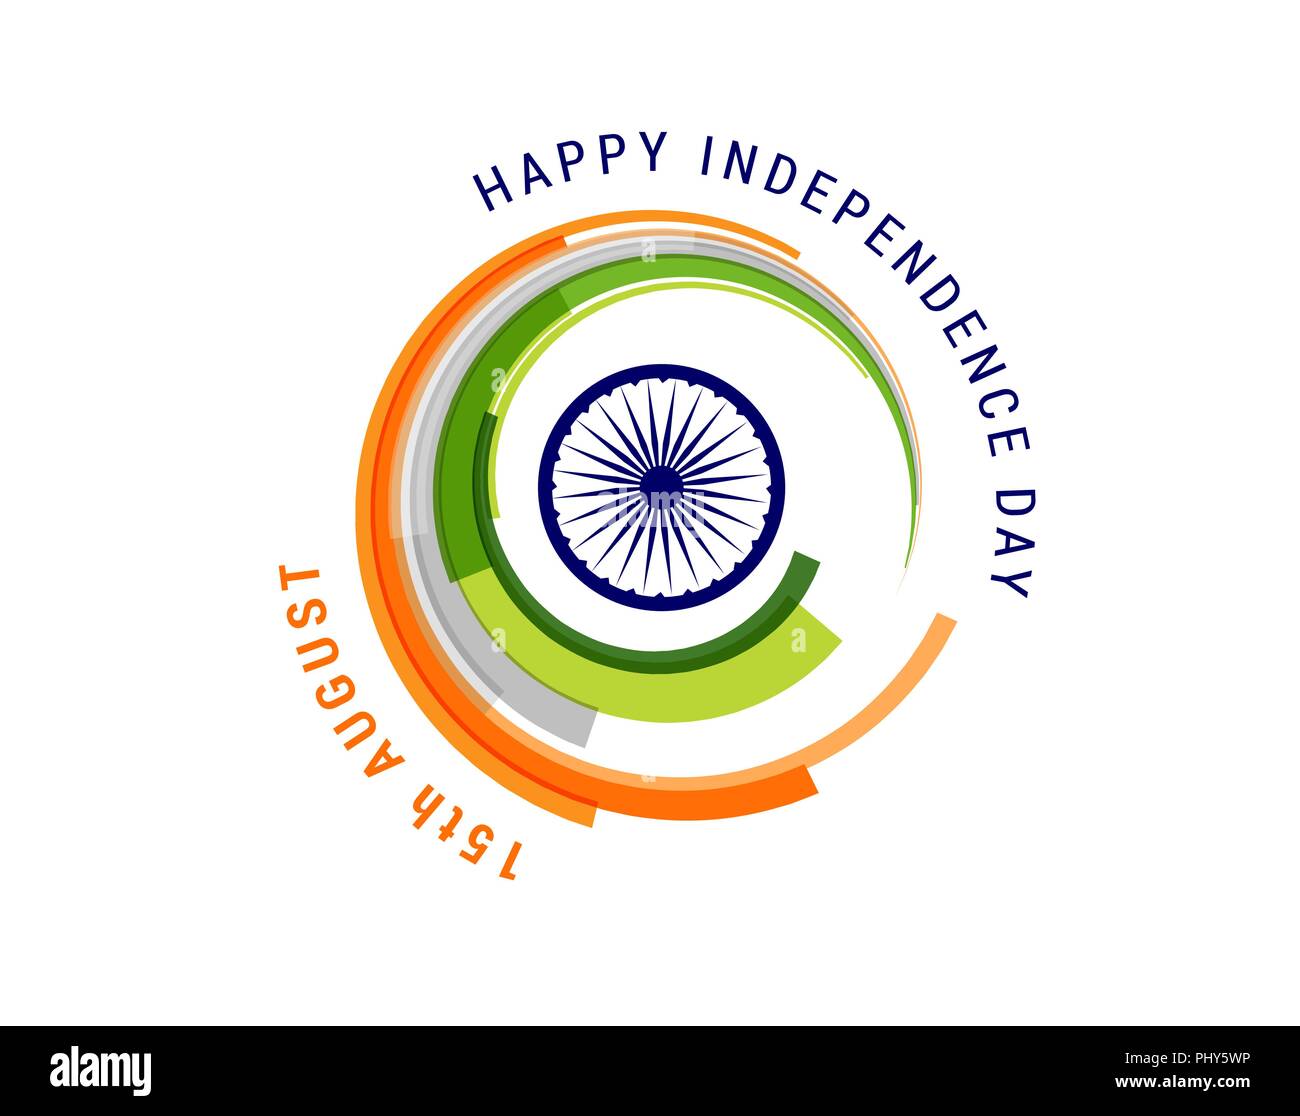 Indian holiday, Happy Independence Day celebration, poster and banner